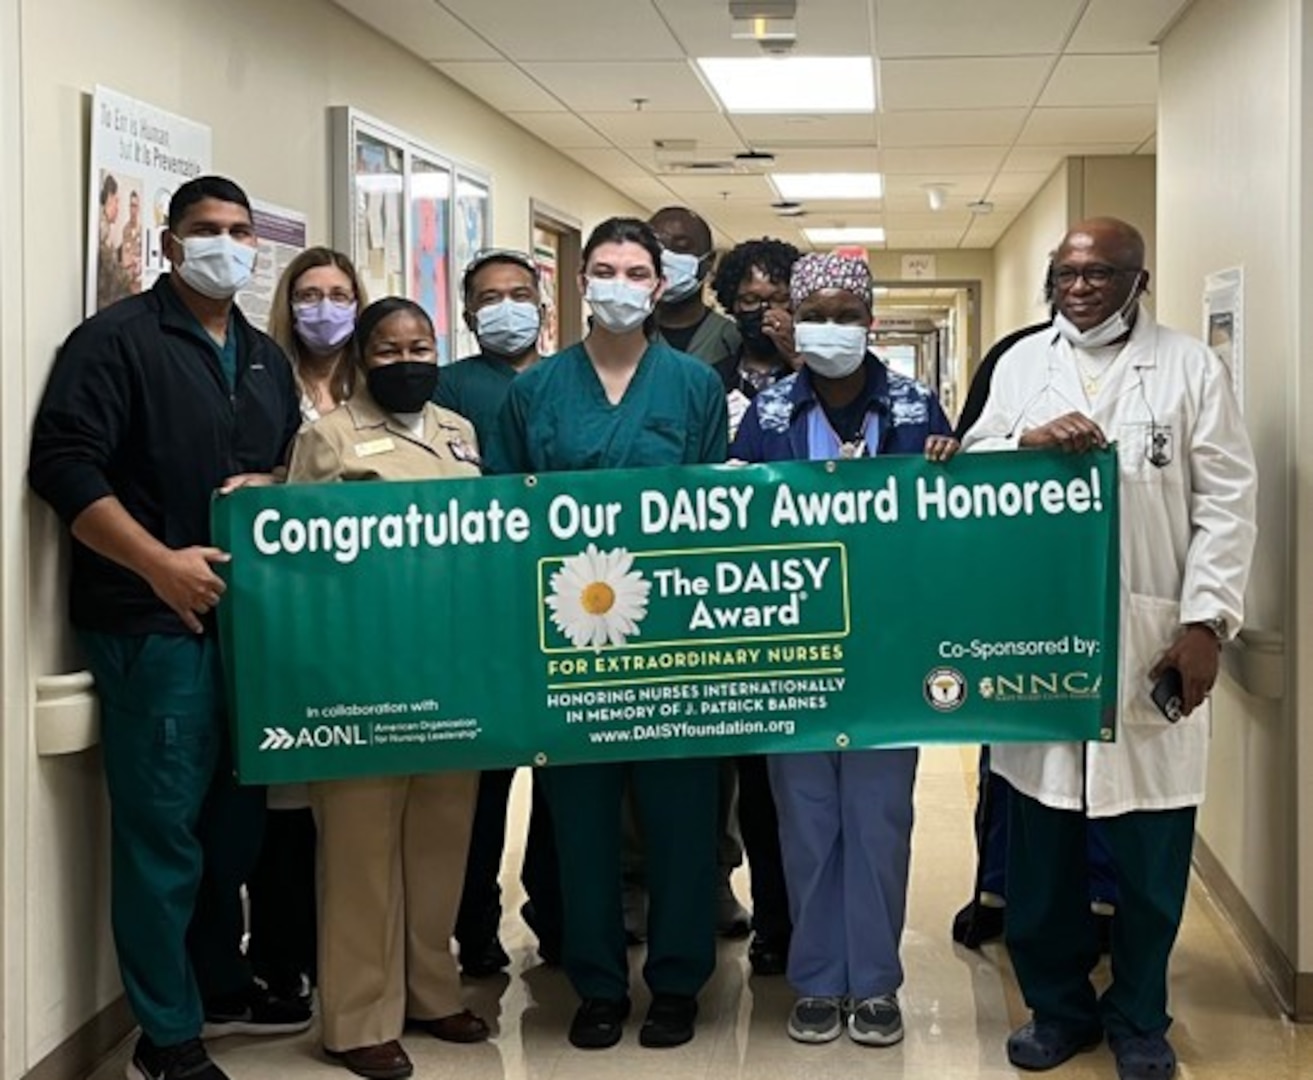 1st Lt. Maria Frisone, center, a nurse at Walter Reed National Military Medical Center (WRNMMC), is presented a commerative DAISY Award honoree banner at WRNMMC in Bethesda, Maryland. Frisone was nominated for The DAISY Award by a WRNMMC patient for professionalism, compassion, and attention to detail.